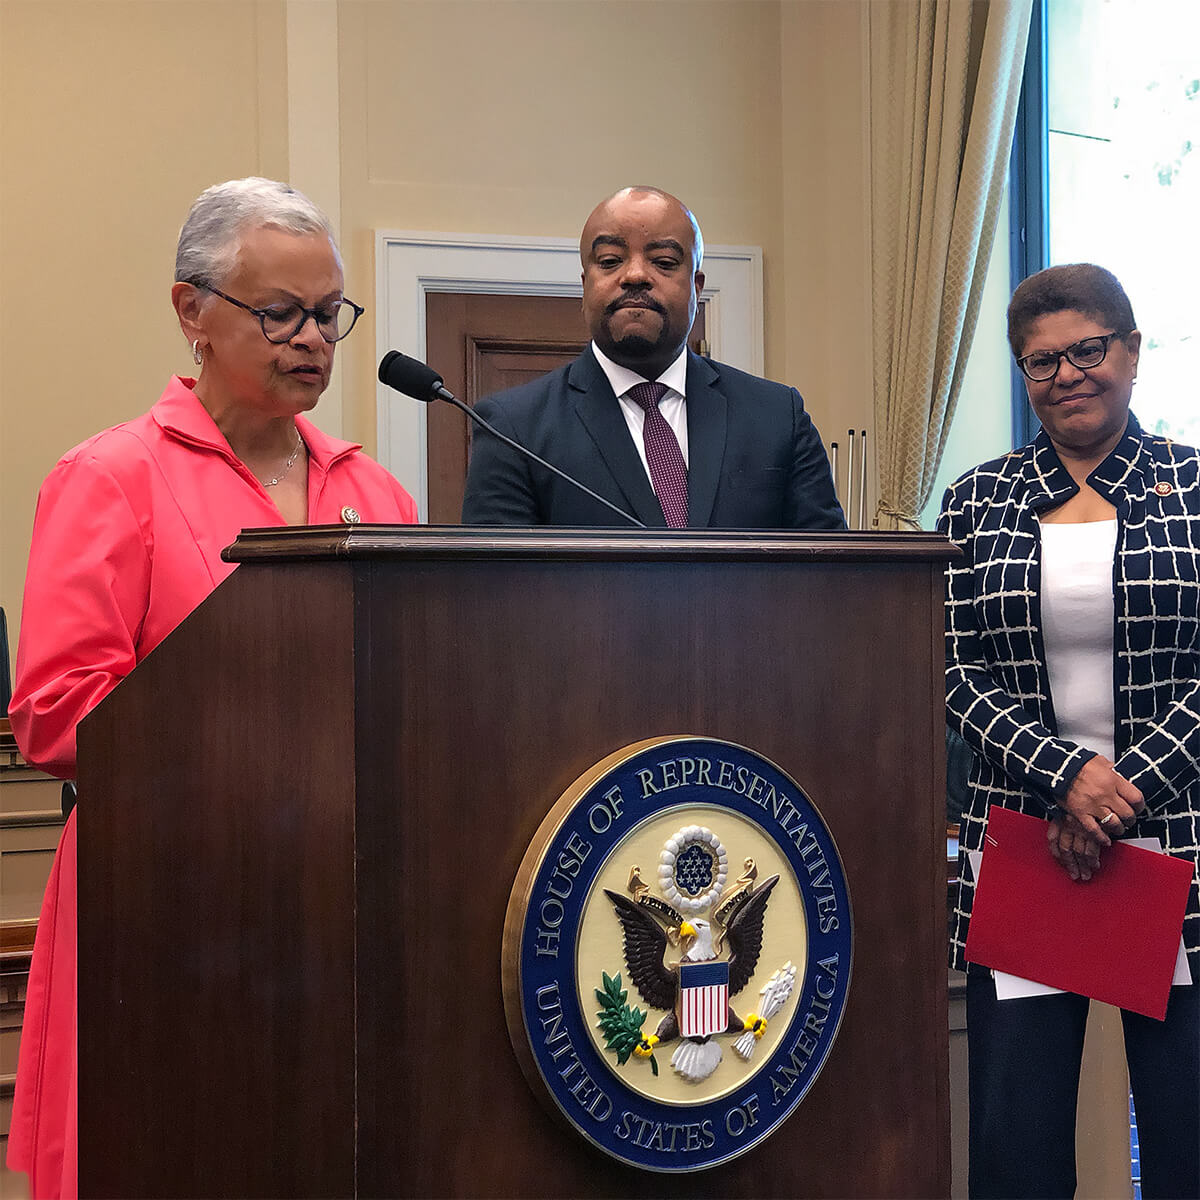 Rep. Bonnie Watson Coleman speaking while Dr. Michael A. Lindsey Rep. Karen Bass look on in 2019.